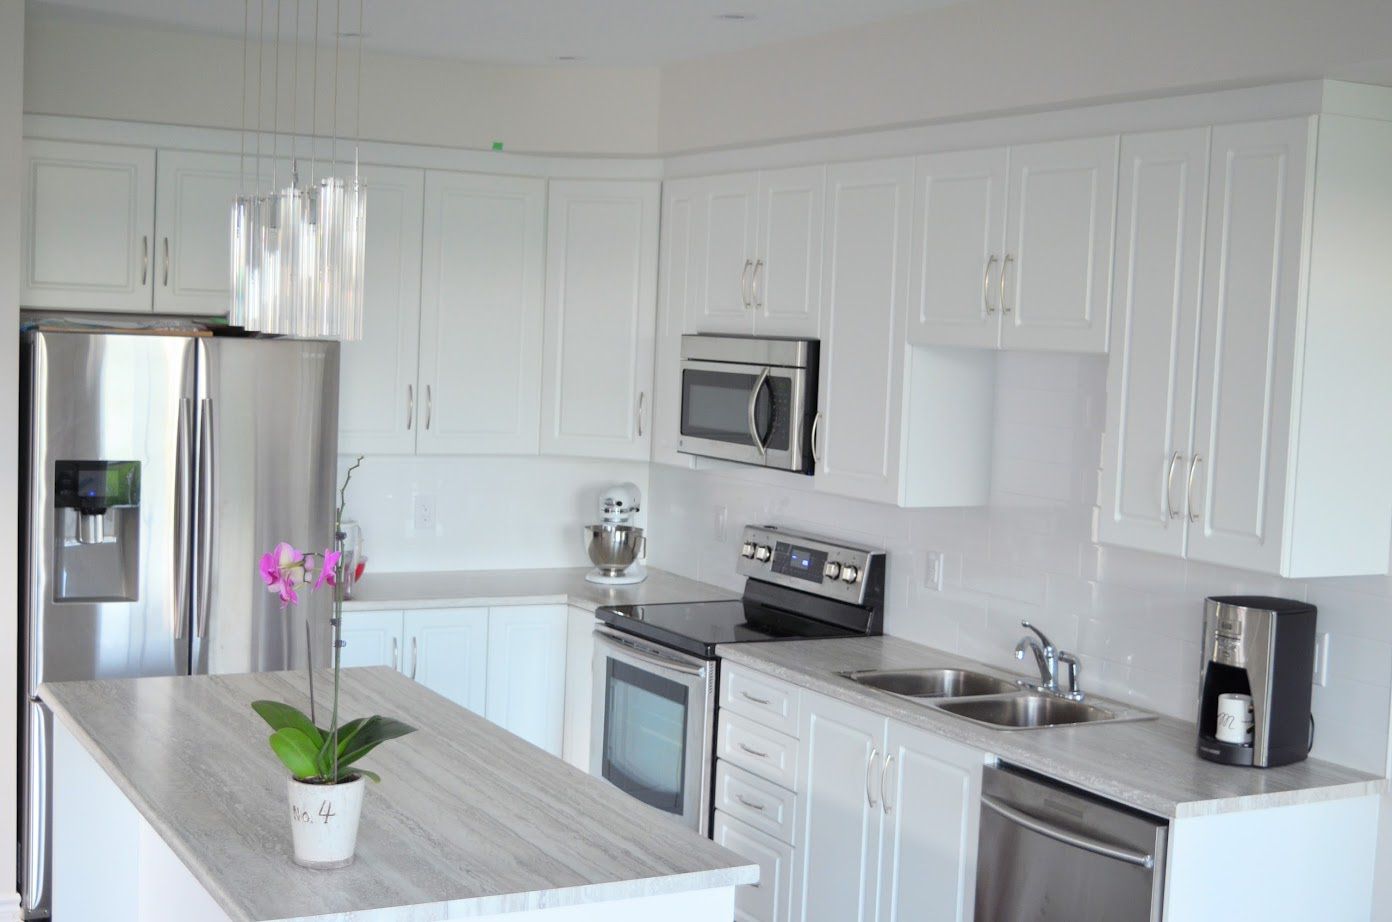 Flawless white kitchen with laminate countertops